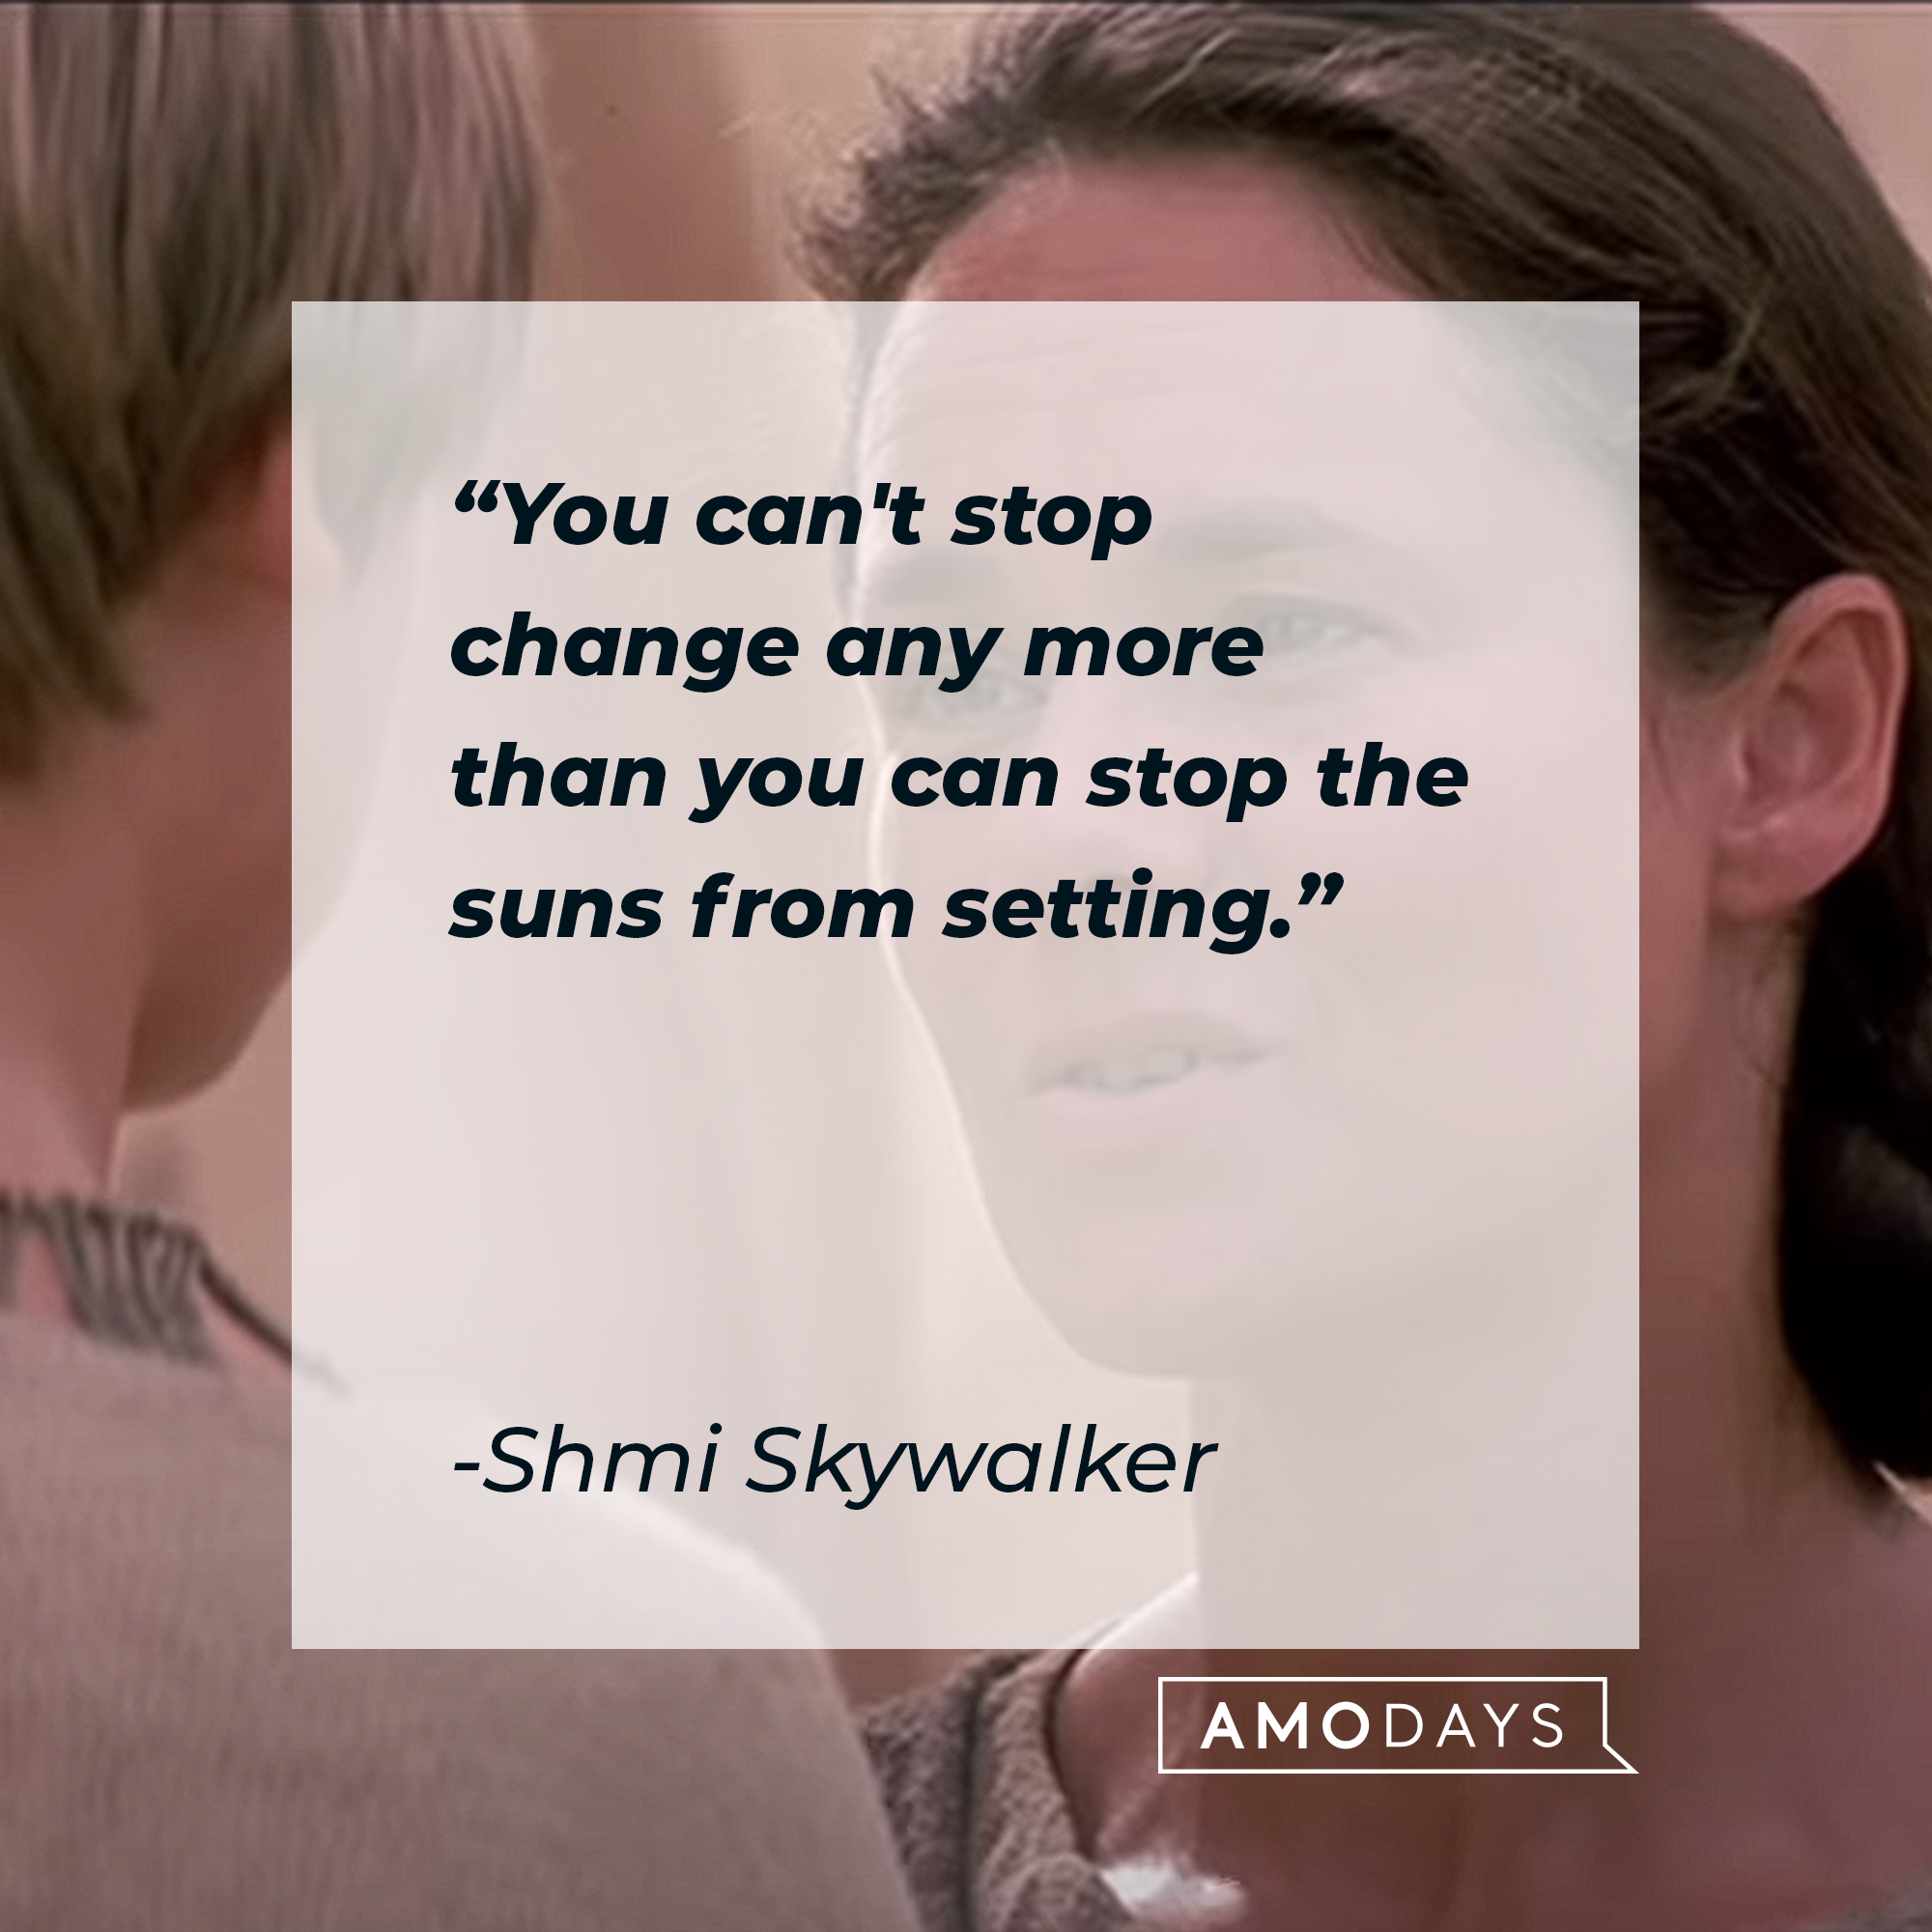 Shmi Skywalker with her quote: "You can't stop change any more than you can stop the suns from setting." | Source: Youtube/StarWars